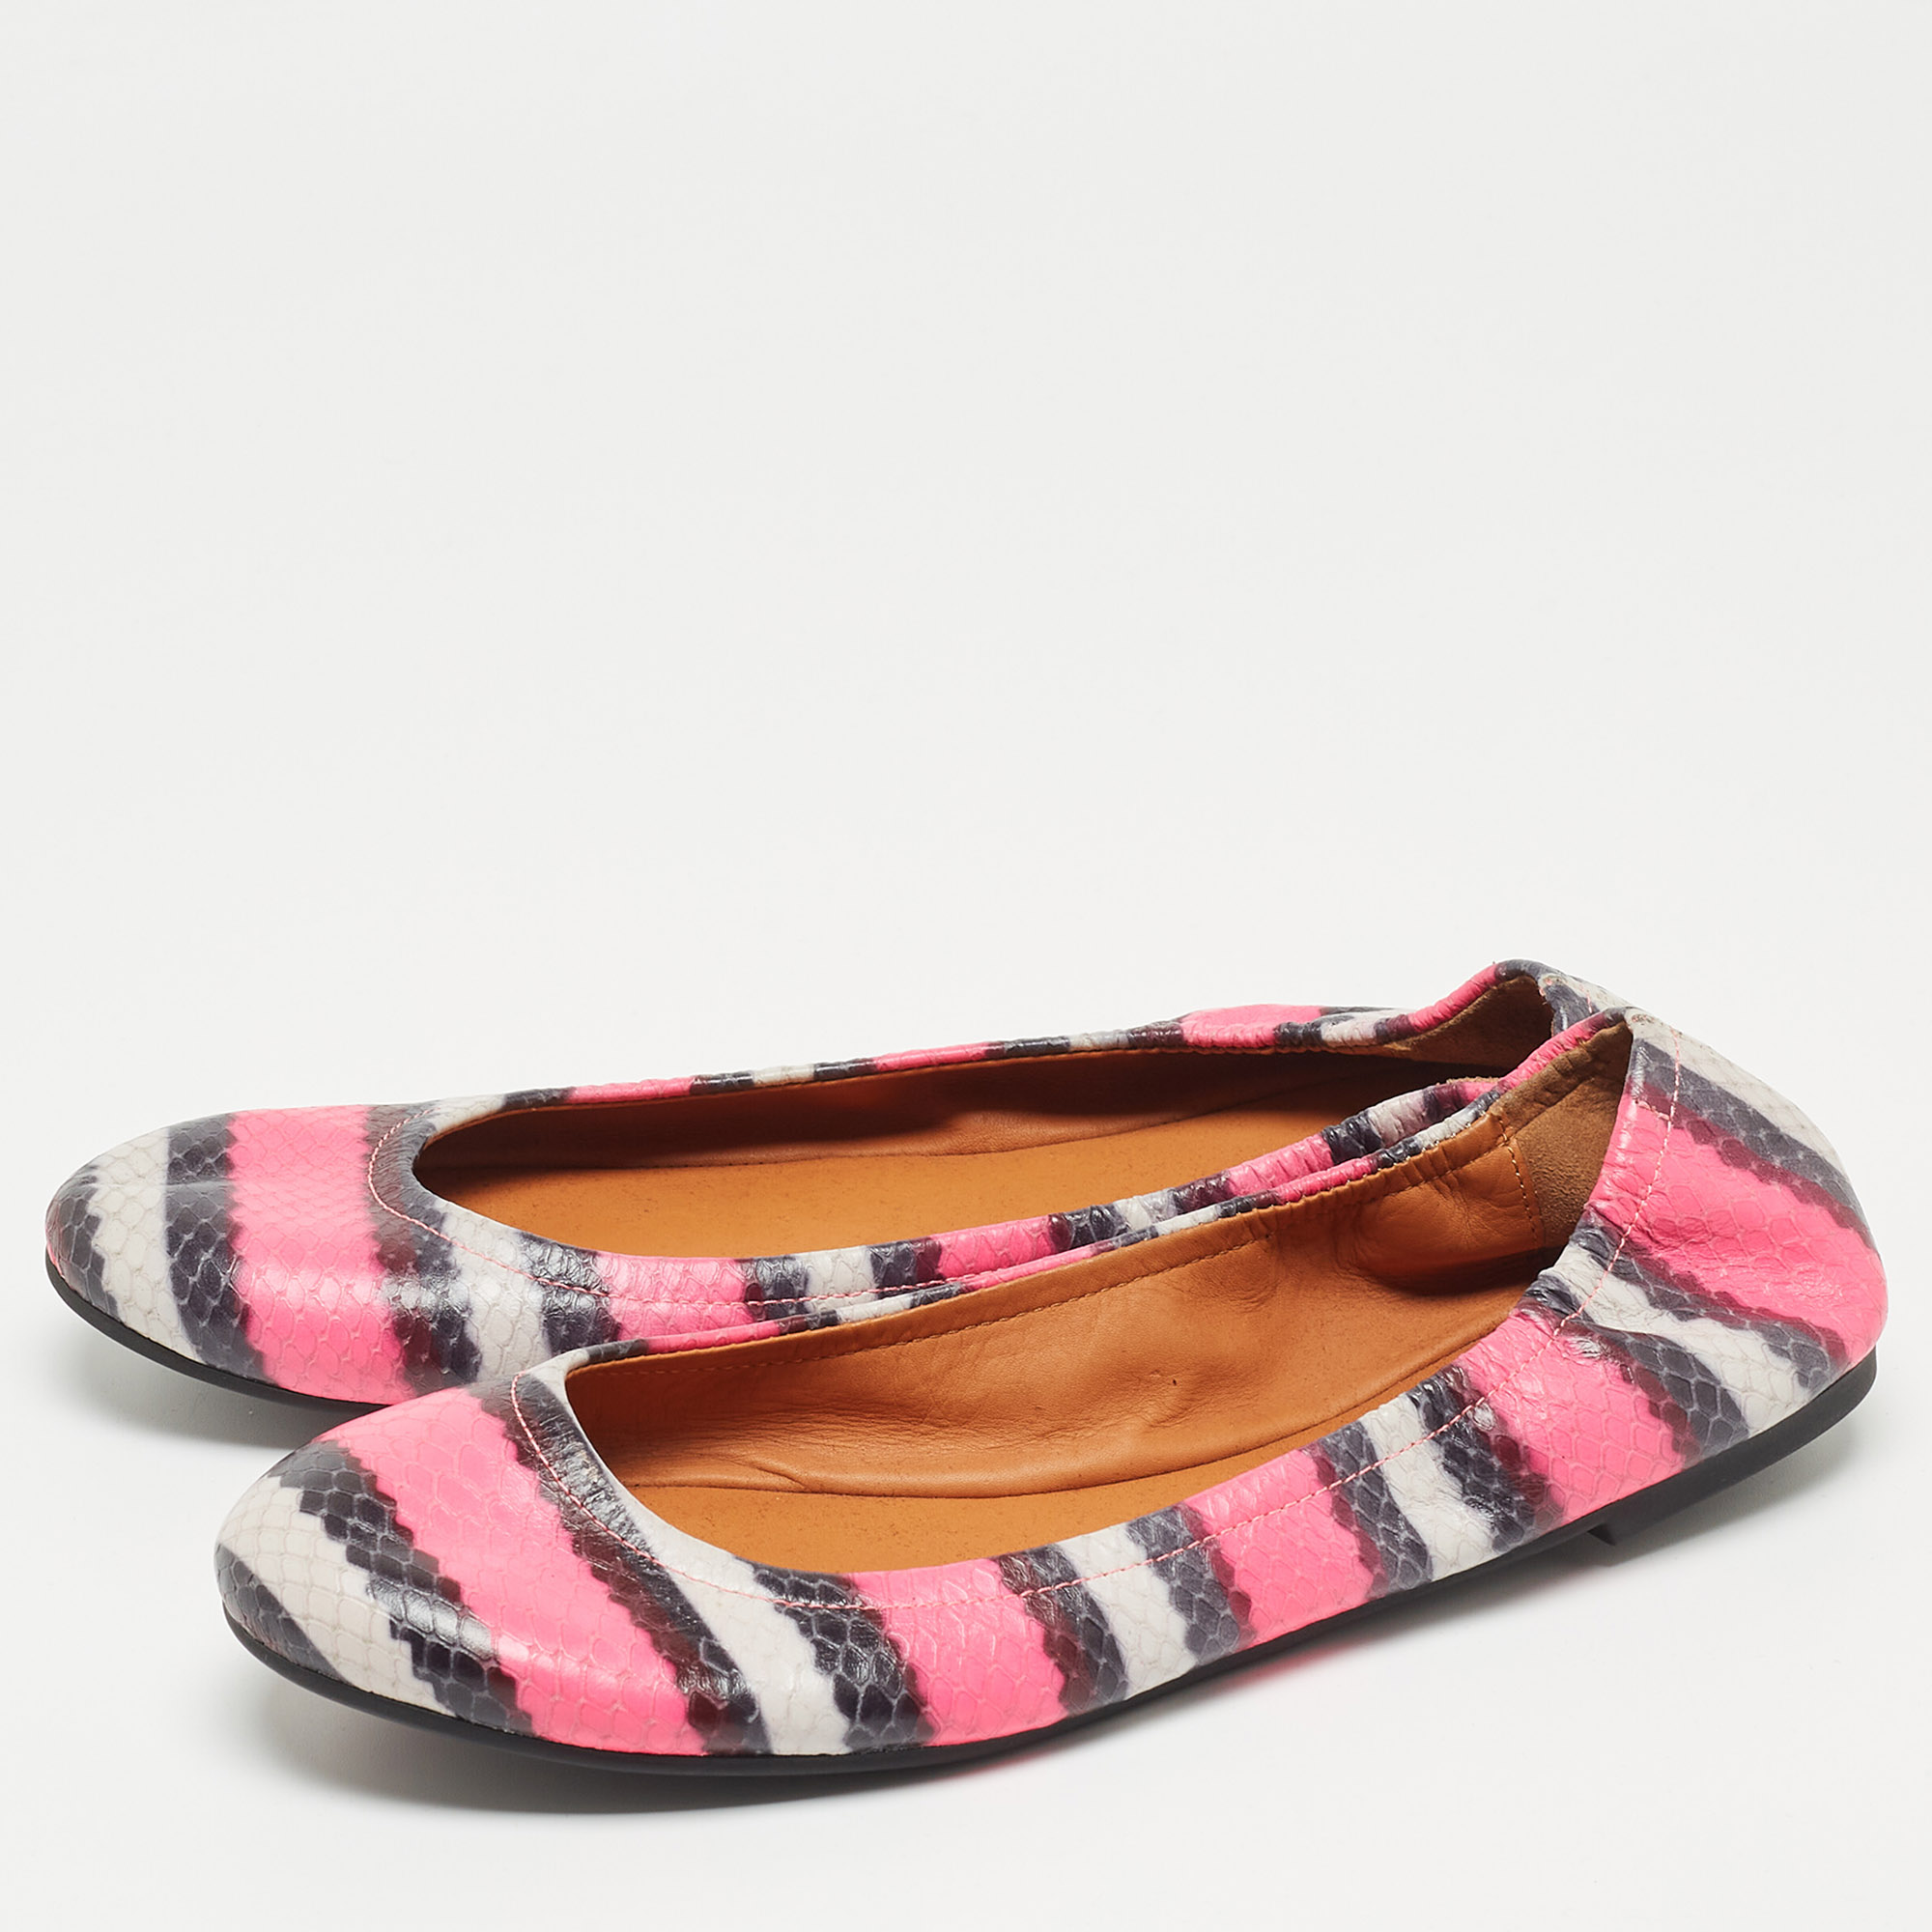 

Marc by Marc Jacobs Tricolor Embossed Snakeskin Ballet Flats Size, Pink